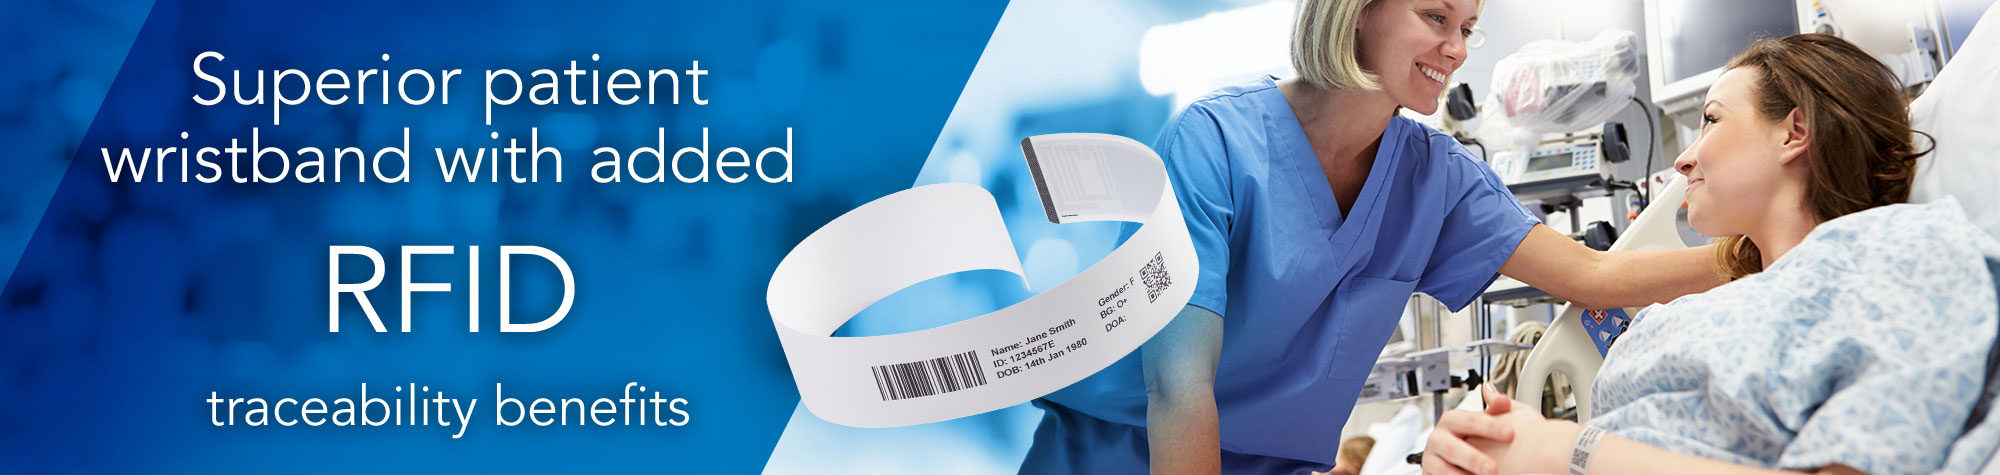 Superior patient wristband with added RFID traceability benefits